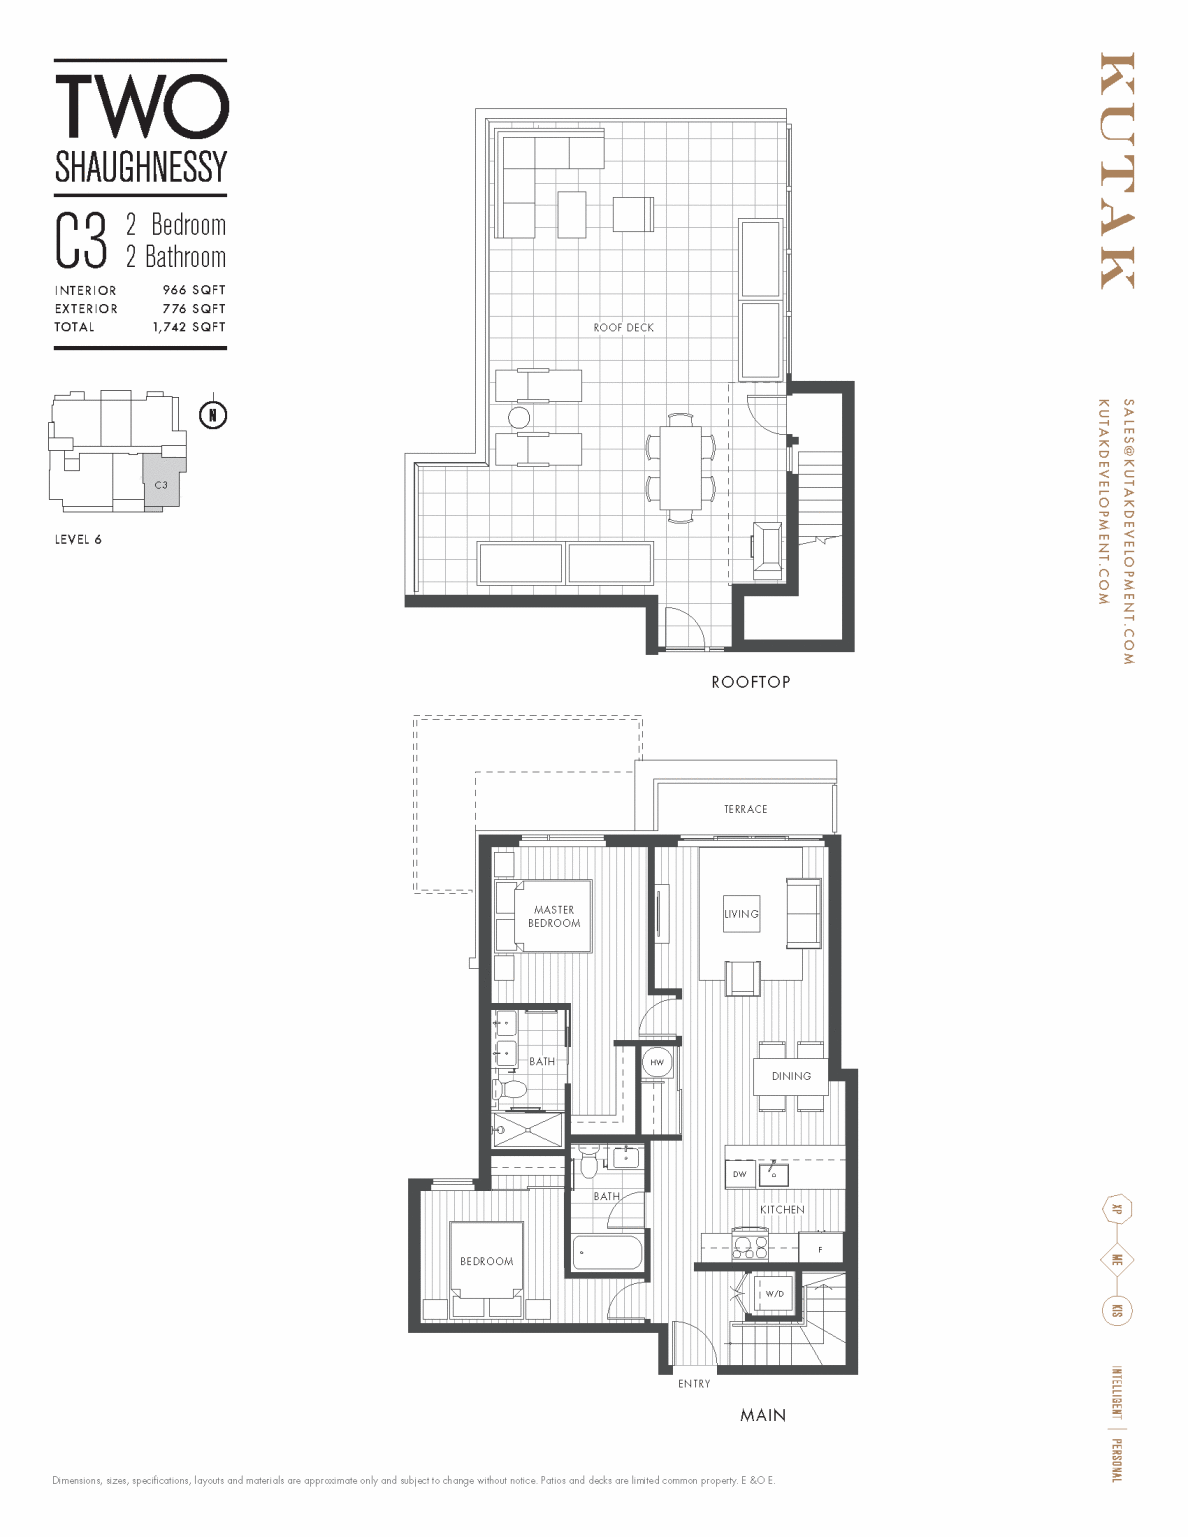 Two Shaughnessy Floor Plan C3